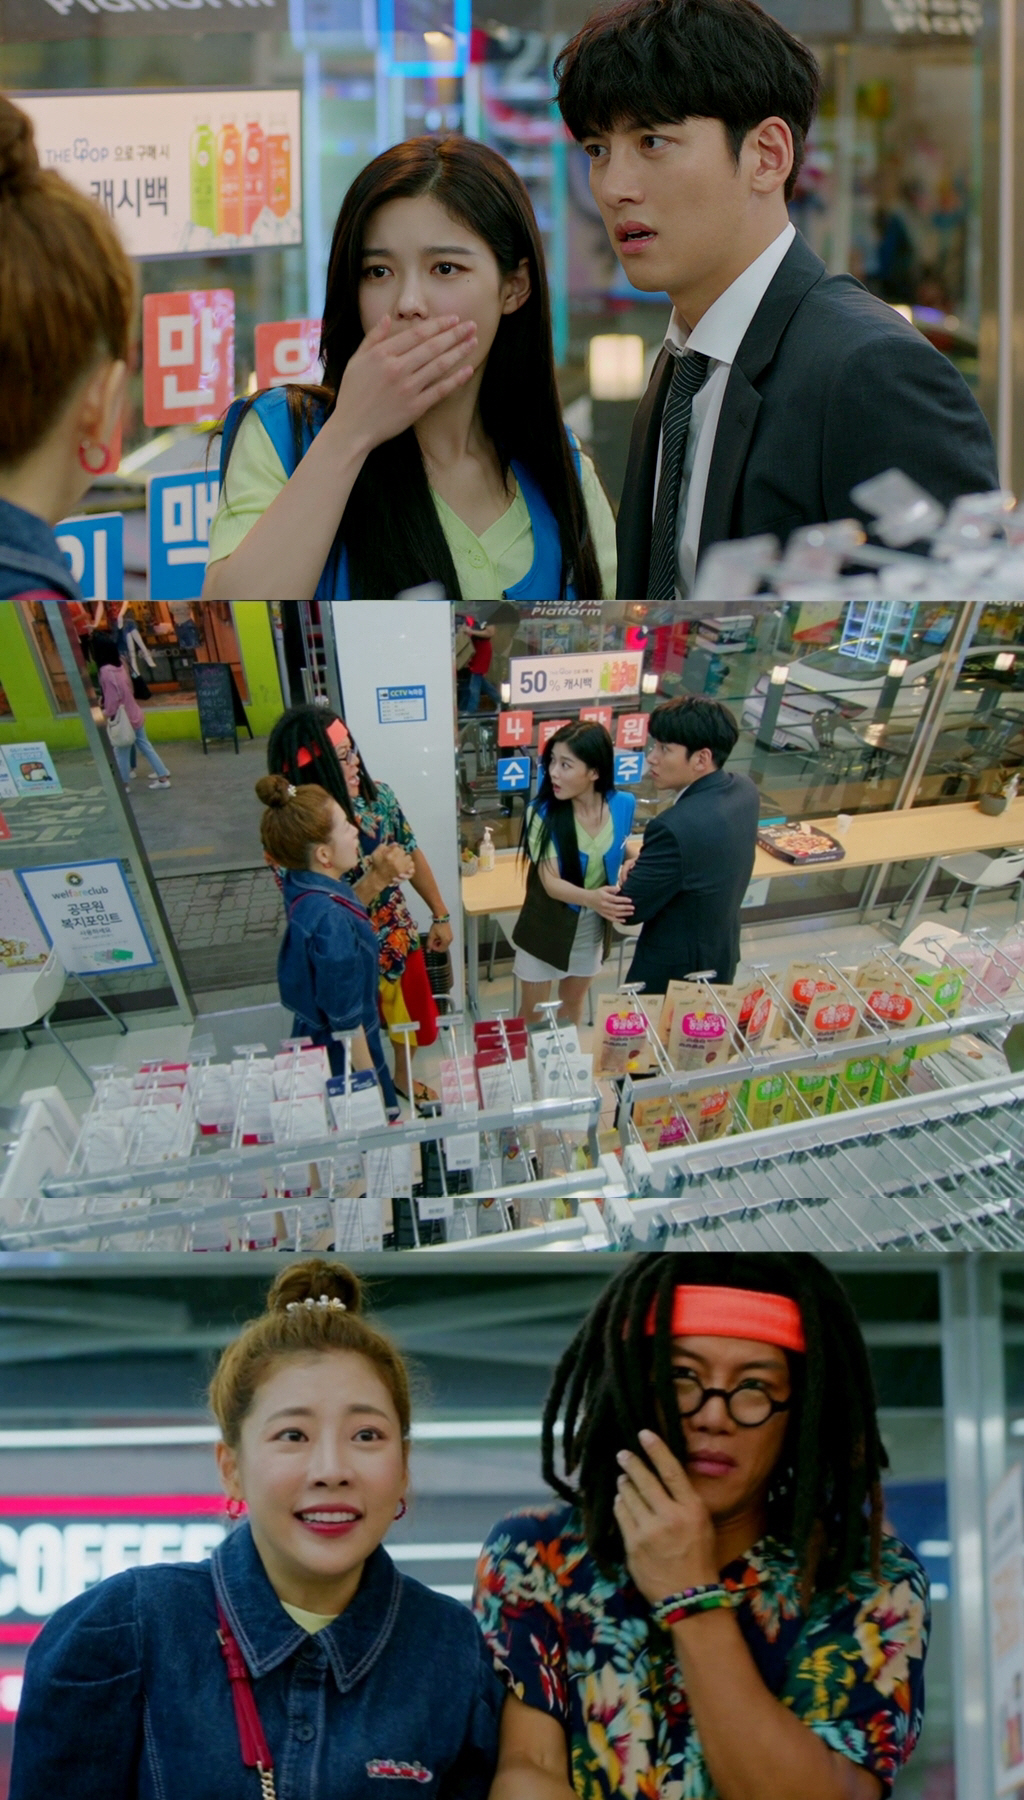 Convenience store morning star Ji Chang-wook and Kim Yoo-jung, yin Mun-seok and calligraphy couple were caught in surprise meeting.With SBSs Lamar Jackson Convenience store Morning Star (playplayplay by Son Geun-joo/director Lee Myung-woo/Producer Taewon Entertainment) leaving only two times to the end, interest in the last story is soaring.In the last 14th episode, with the confession of Choi Dae-heon (Ji Chang-wook), who was aware of Kim Yoo-jung as a precious and special person, the crisis factors that block them were predicted and increased tension.In addition to the romance of Choi Dae-heon and Jeong-Sun-Sun-Sun, which thrills viewers, there are also the unexpectedly romantically romantically-driven Friend Han Dal-sik (Mun Moon-seok), and Friend Golden Rain (Seo-hwa-Byeon) couple of Jeong-Sun-Sun-Sun-Sun-Sun.Han Dal-sik and Golden Rain, who were growling even if they met their faces, laughed in a trials after learning that each others identity was a ransom love affair.On August 6, the production team of Convenience store morning star reveals the surprise meeting of Choi Dae-heon, Jeongsae star, Handalsik and Golden rain.The faces of the four people who encountered in the Convenience store are filled with embarrassment, shock, and shame, which inspires curiosity about what circumstances they met.Choi Dae-heon and Jung Sae-sung in the public photos are surprised at the side-by-side appearance of Han Dal-sik and Golden Rain.Han Dal-sik is pressingly covering his face, and the Golden Rain is trying to say something: The star is on the side of the biggest side and is covering him.The confused situation of the four people who are confronted by each others eyes robs their eyes.The Convenience store scene, where the couple Cross of the hallucinations took place, is already foreshadowing laughter.It stimulates curiosity about the situation of the four people who seem to have met in the Convenience store.Ji Chang-wook, Kim Yoo-jung, Pseudo, Calligraphy Actors, the back door that emits fantasy chemistry in the scene that they saw with an adverb-filled Acting.The Convenience store morning star, which can not be missed until the end, is expected to attract the attention of viewers with the fun and pleasant scenes.On the other hand, SBS Jackson Convenience store morning star, which has only two times to the end, has been loved by the house theater for 7 consecutive weeks since the first broadcast.Convenience store morning star 15 times will be broadcast on Friday, August 7 at 10 pm.